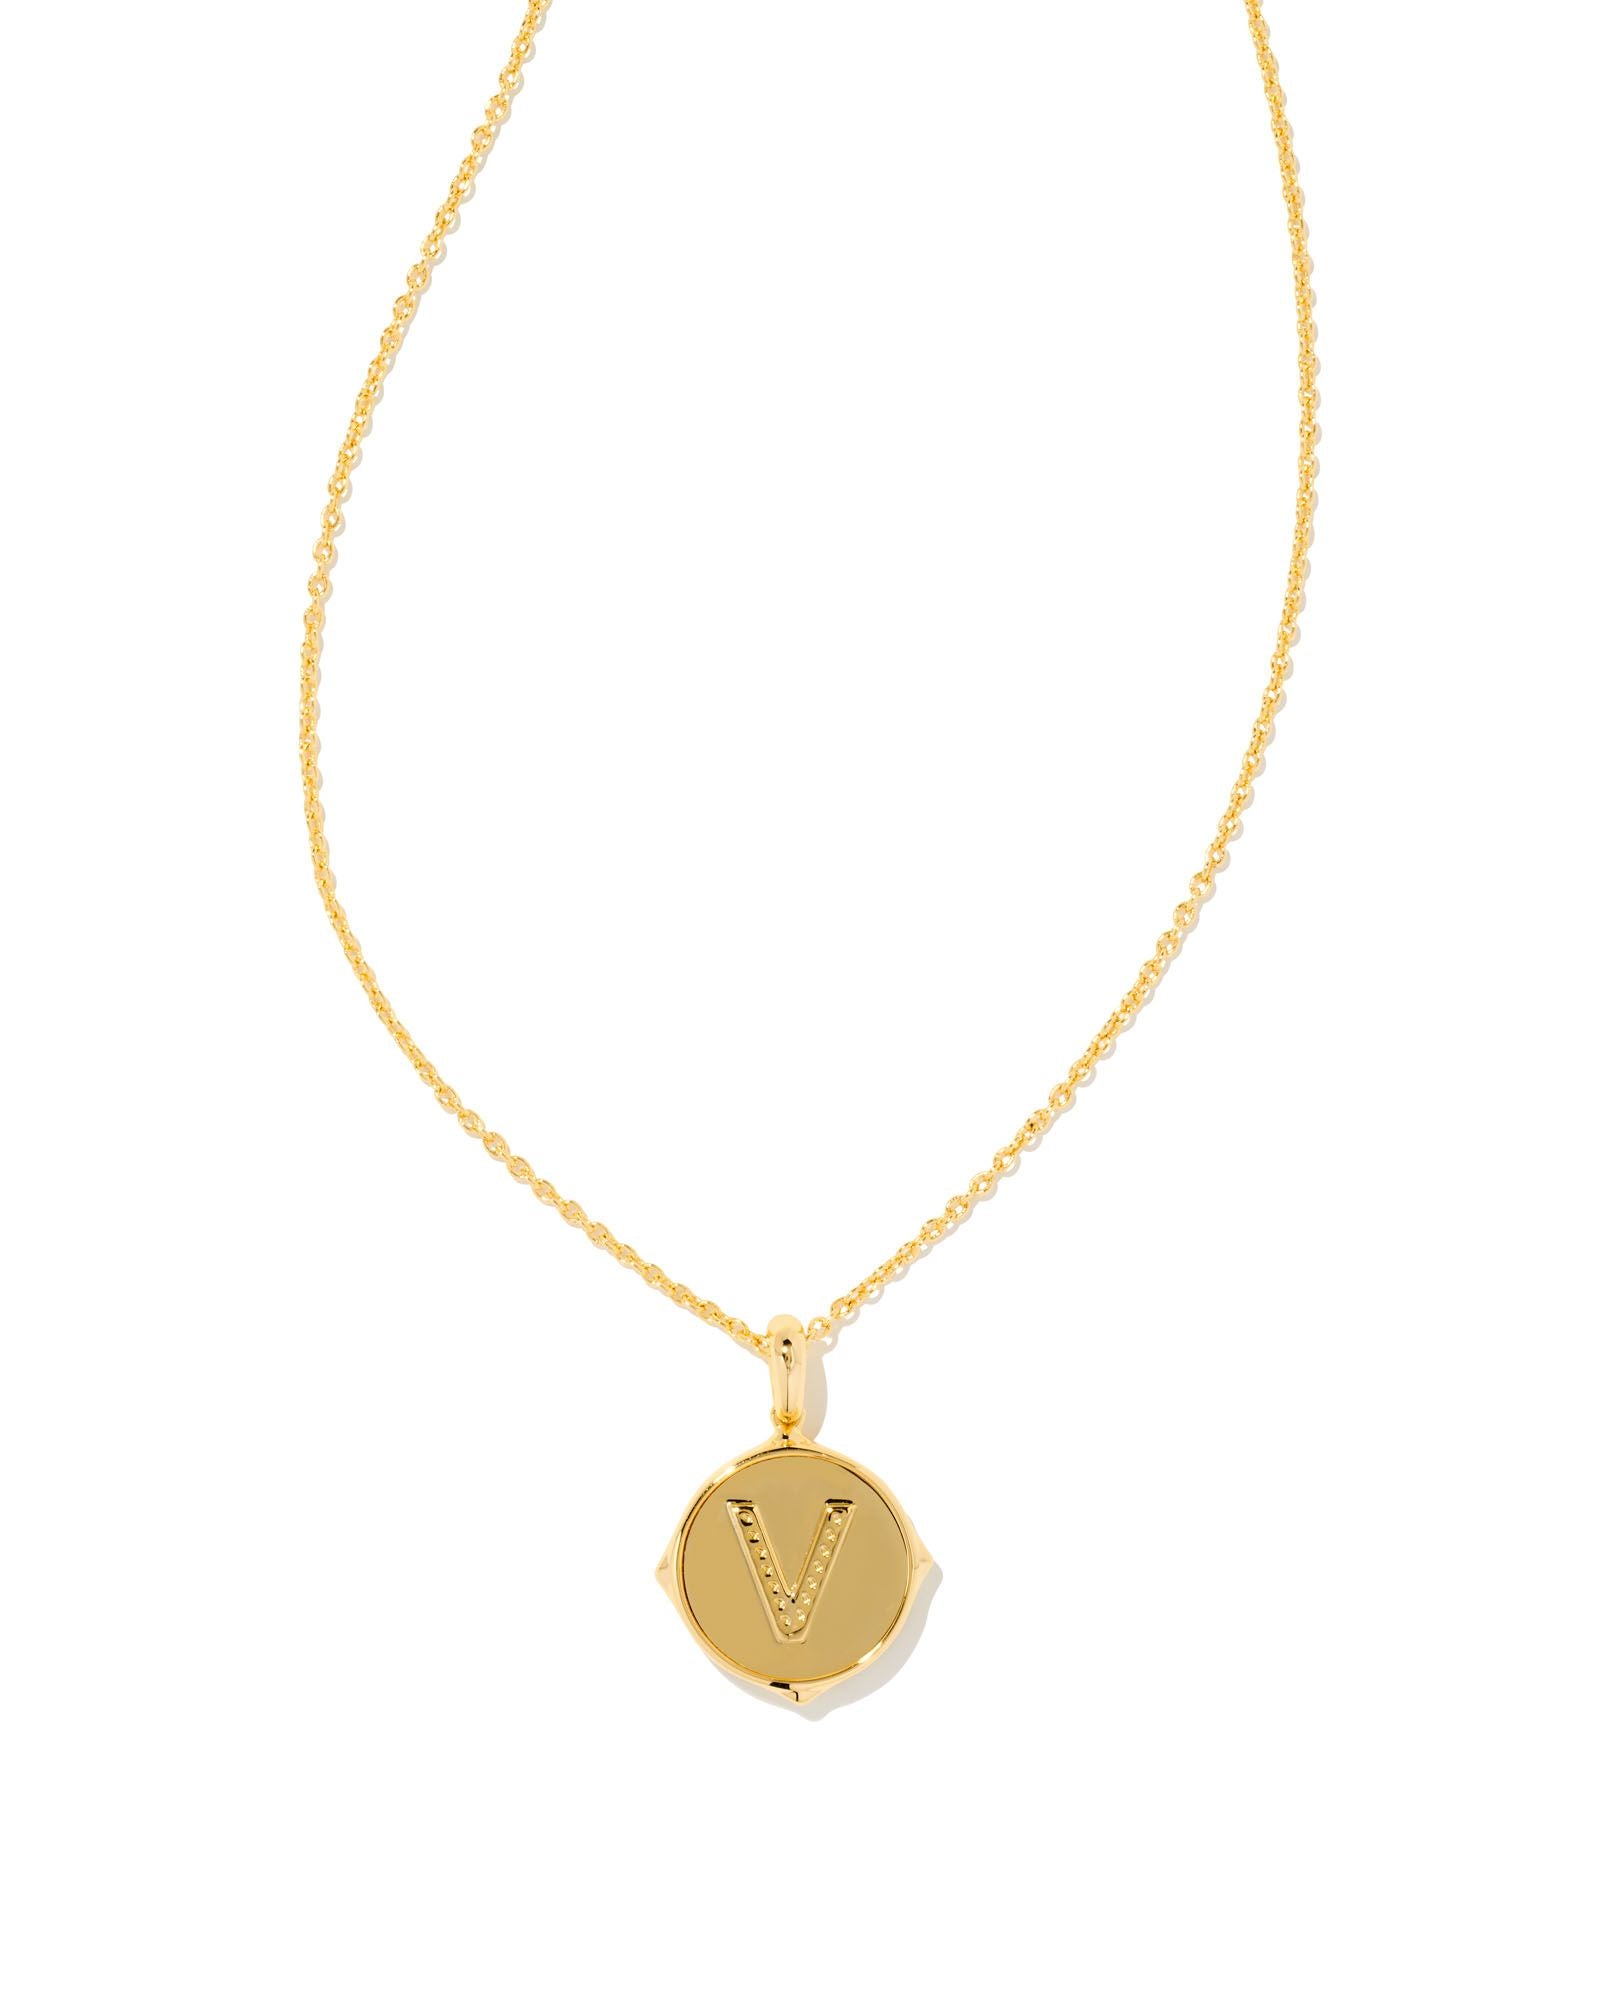 Buy Gold Simple V Initial Necklace, Gold Stamped V Necklace, Stamped V  Initial Necklace, Gold Small V Initial Necklace, Gold V Initial Charm  Online in India - Etsy